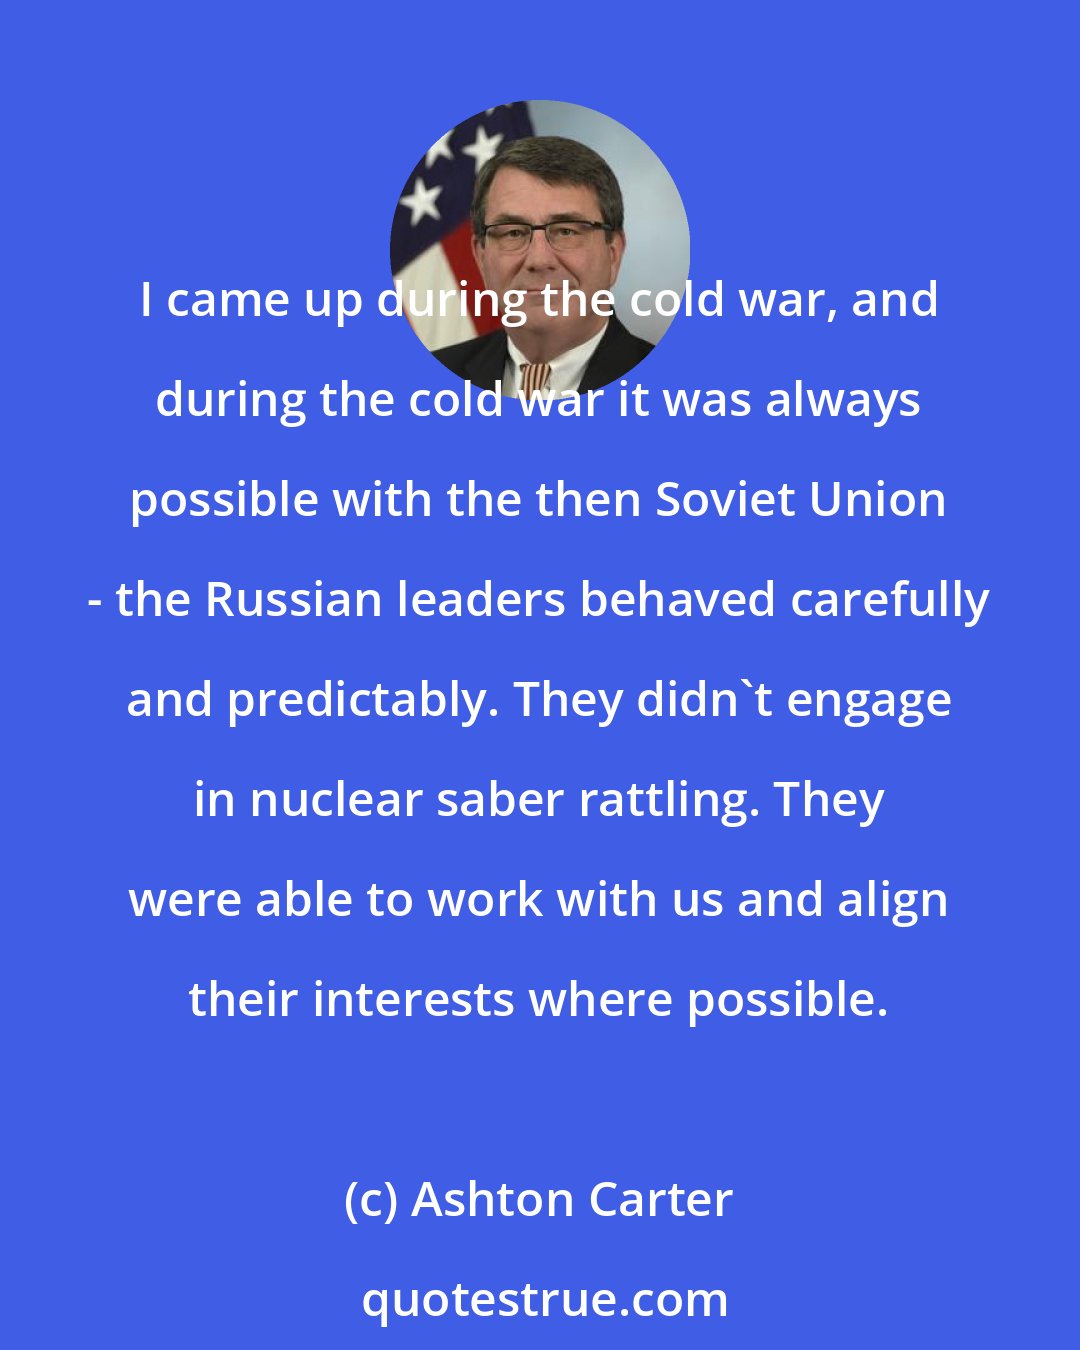 Ashton Carter: I came up during the cold war, and during the cold war it was always possible with the then Soviet Union - the Russian leaders behaved carefully and predictably. They didn't engage in nuclear saber rattling. They were able to work with us and align their interests where possible.